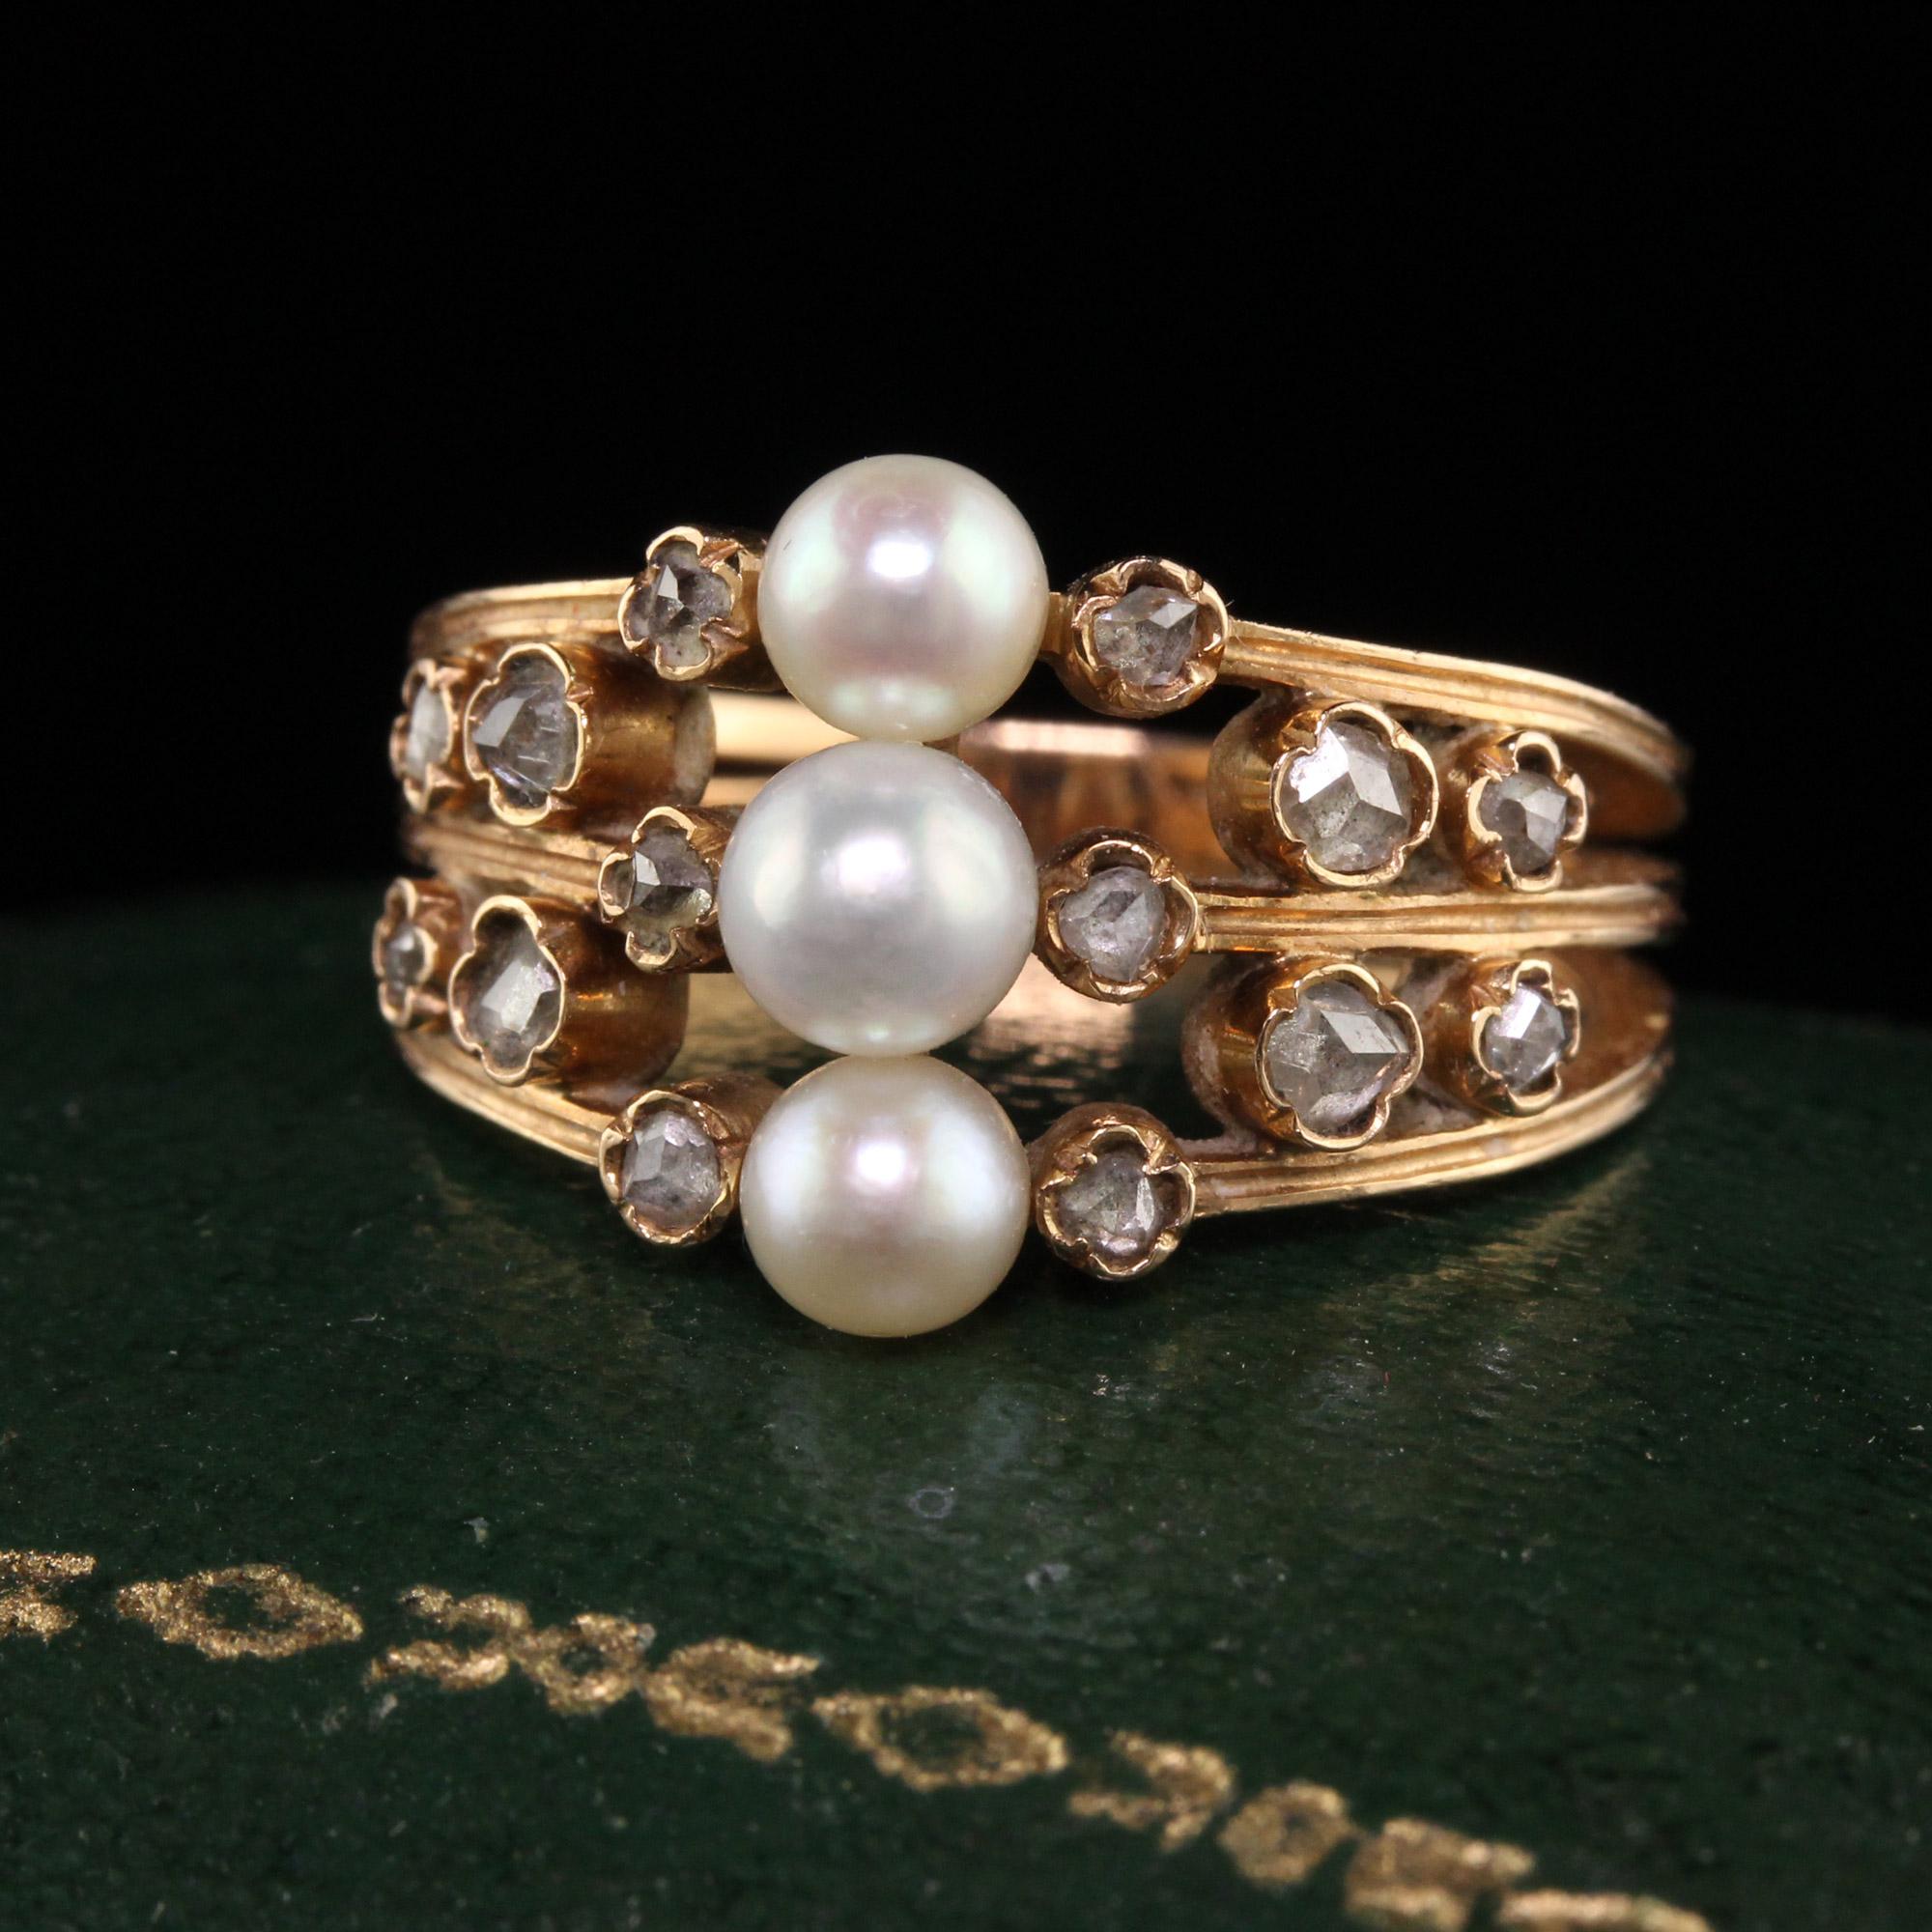 Beautiful Antique Art Deco 18K Rose Gold Pearl and Rose Cut Diamond Ring. This beautiful ring is crafted in 18k rose gold. The center holds 3 beautiful pearls and has rose cut diamonds on each side in a beautiful pattern. The ring is in great